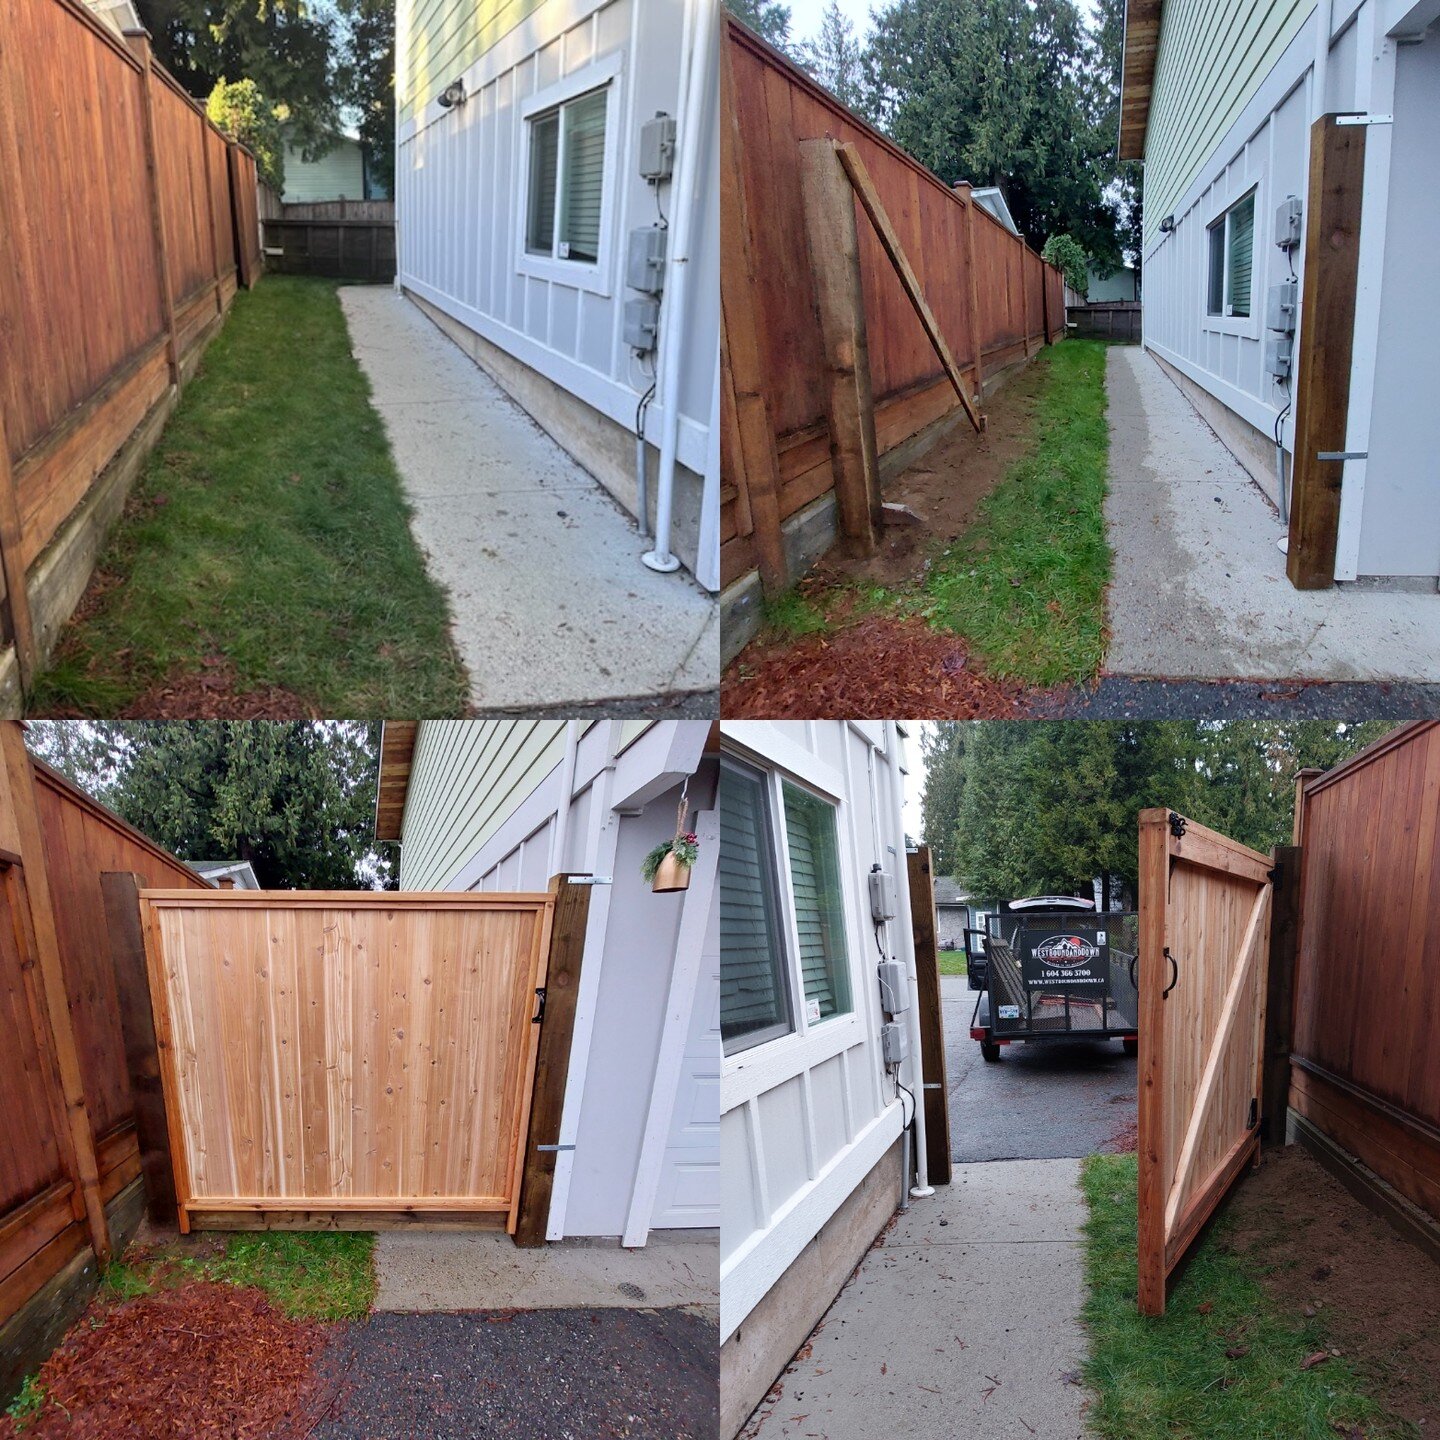 New Custom Side Entrance Gate Installation service. Client requested a new Custom Cedar side entrance gate installation to close in the yard for safety and security.